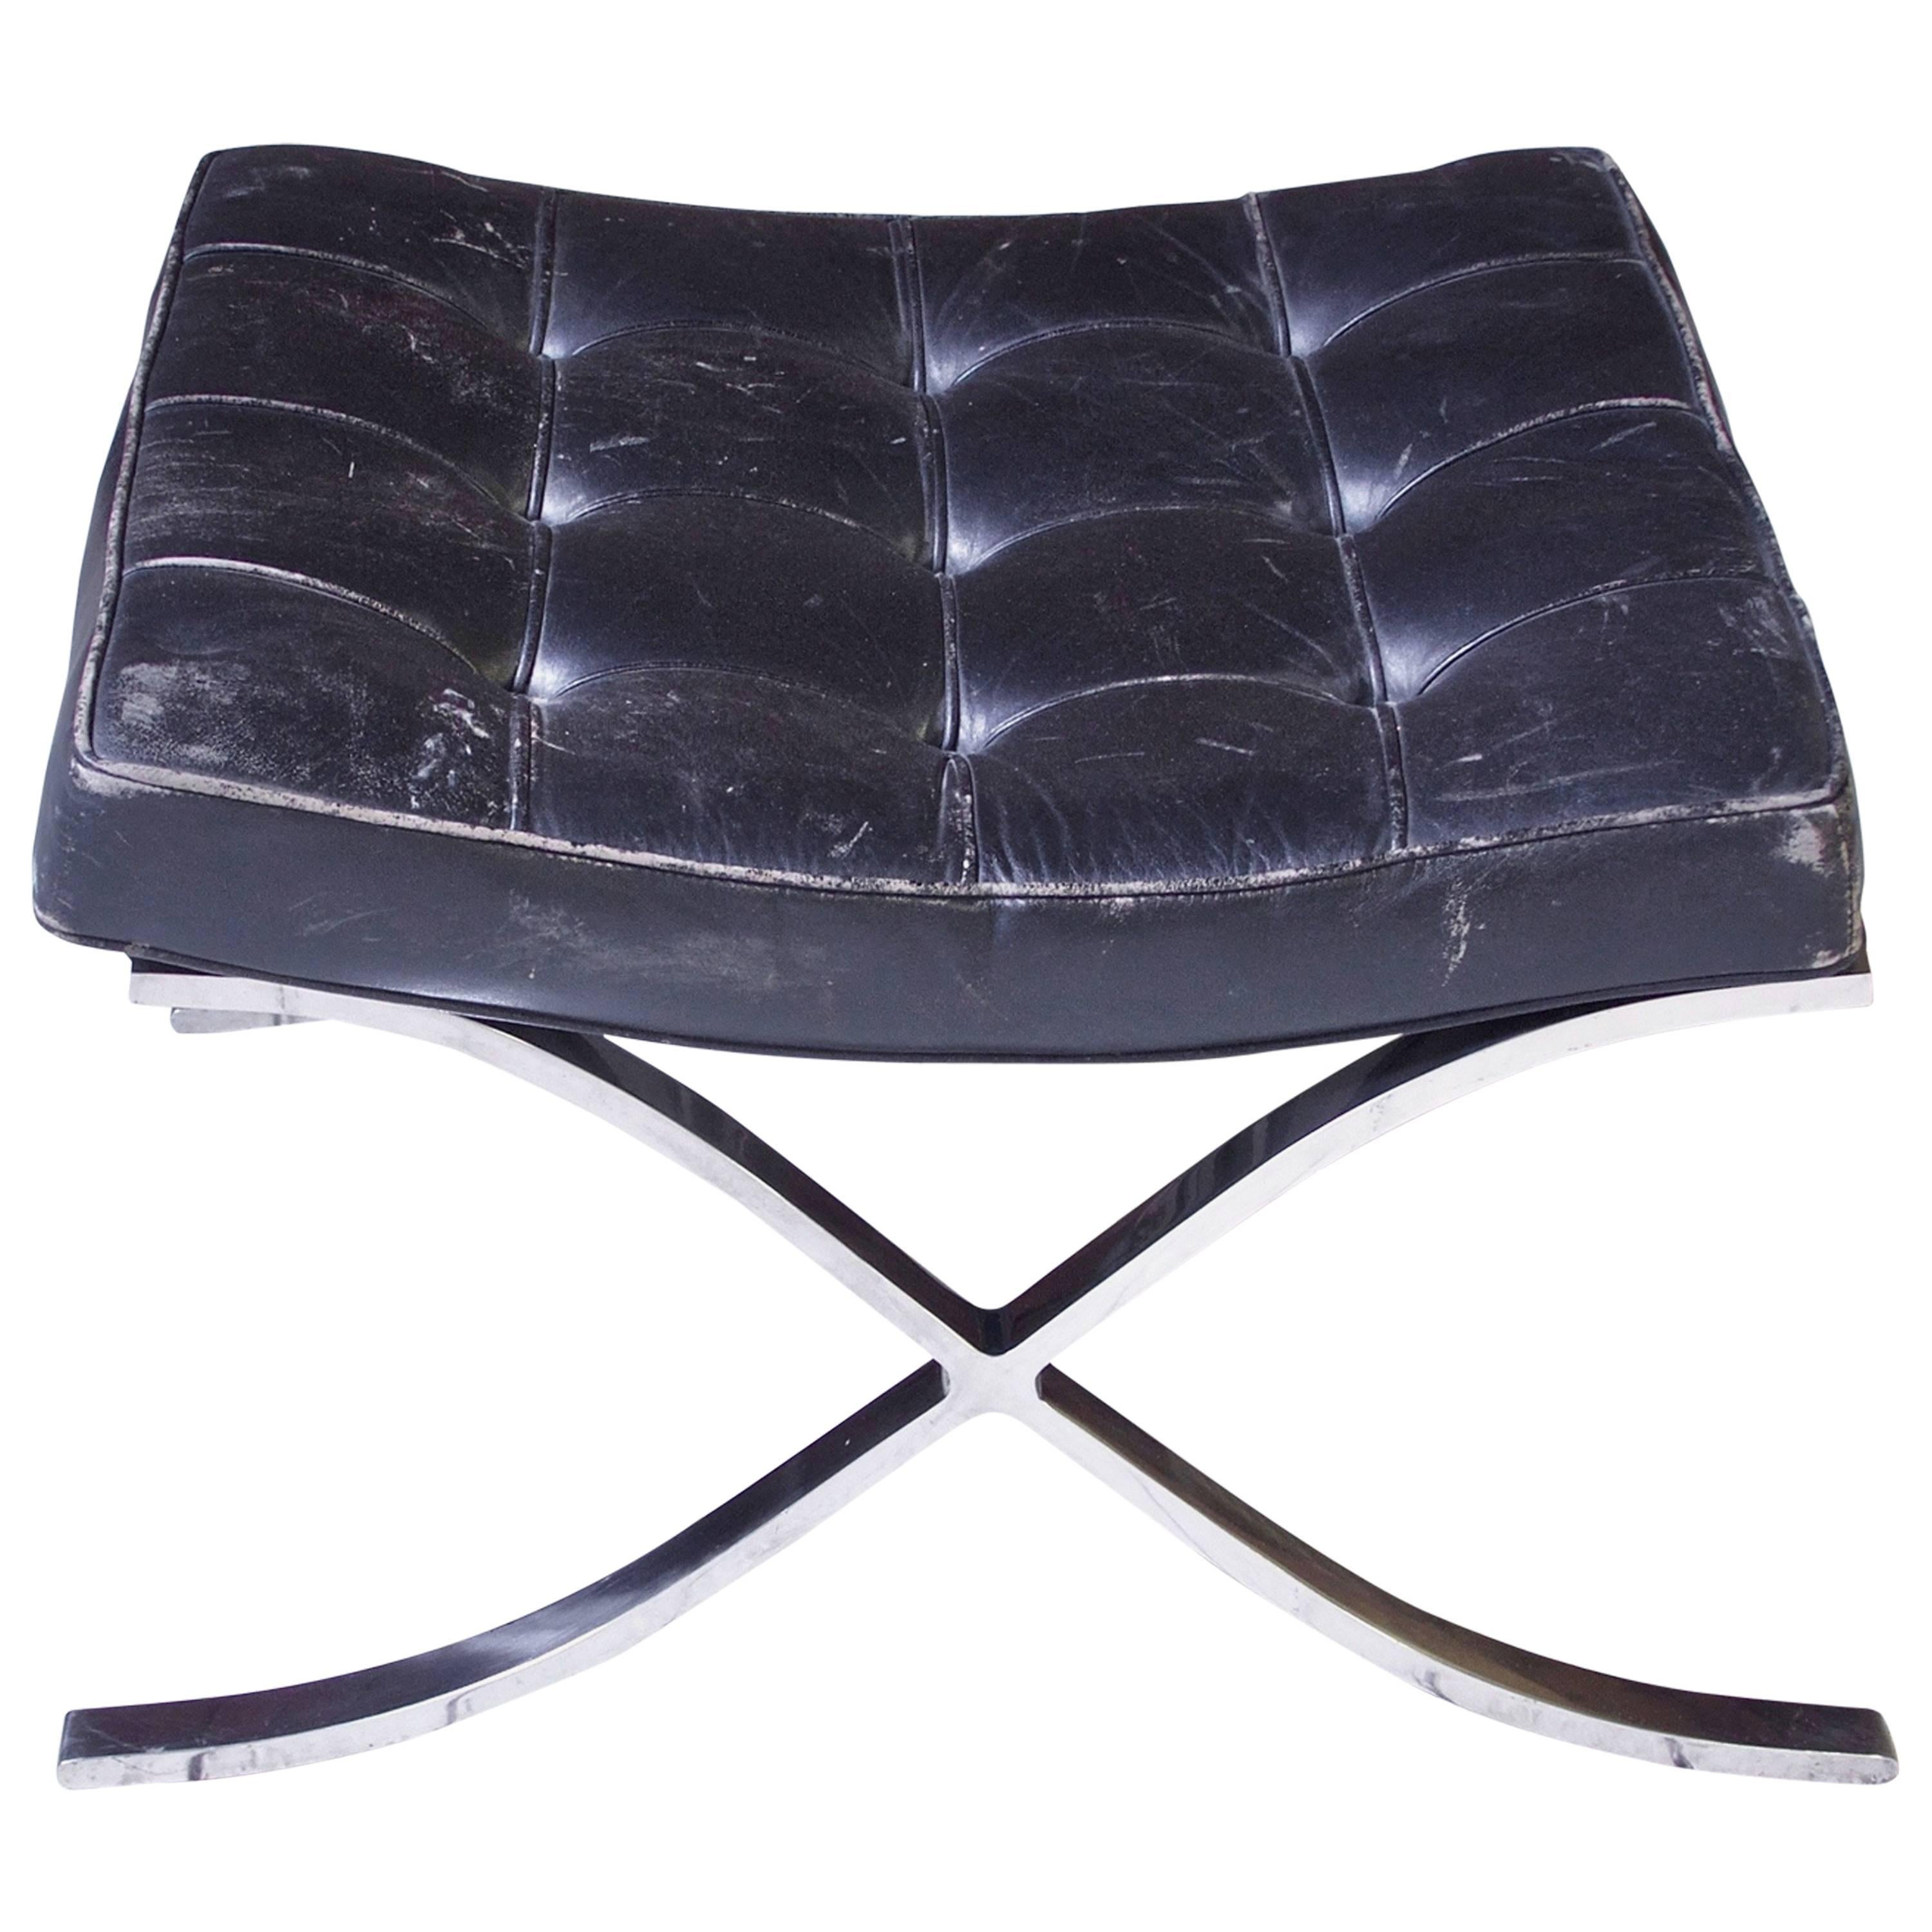 First Knoll Edition Vintage Barcelona Stool in Black Leather and Steel, 1953